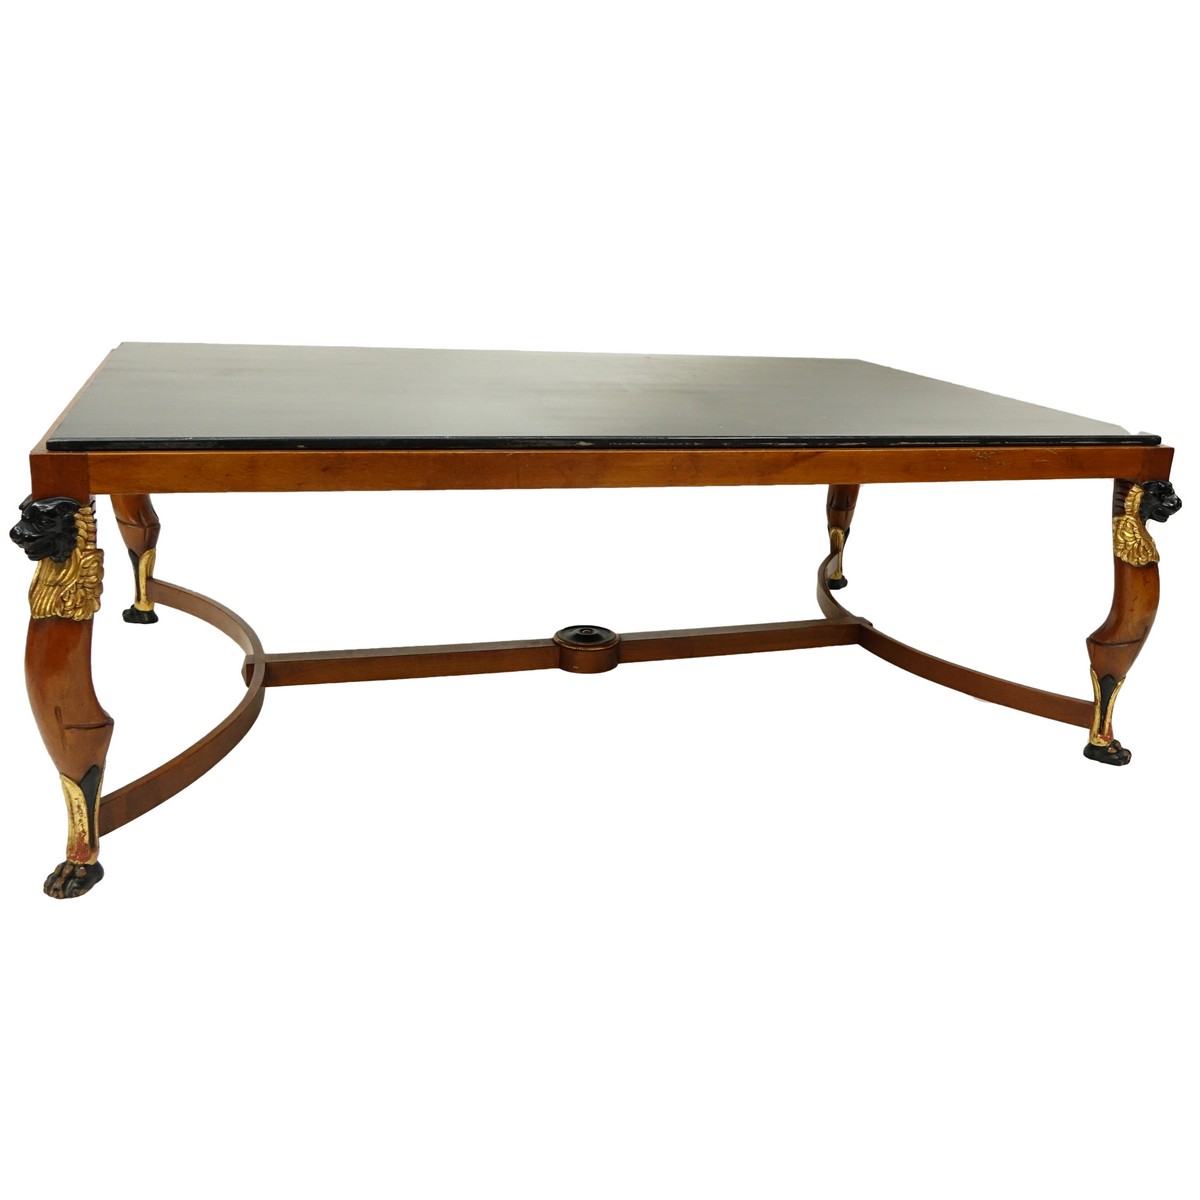 Mid Century Empire Style, Parcel Gilt, Egyptian Revival Carved Wood Marble Top Coffee Table. Typical scuffs to gilt and paint, light scratches, possible restoration to marble.